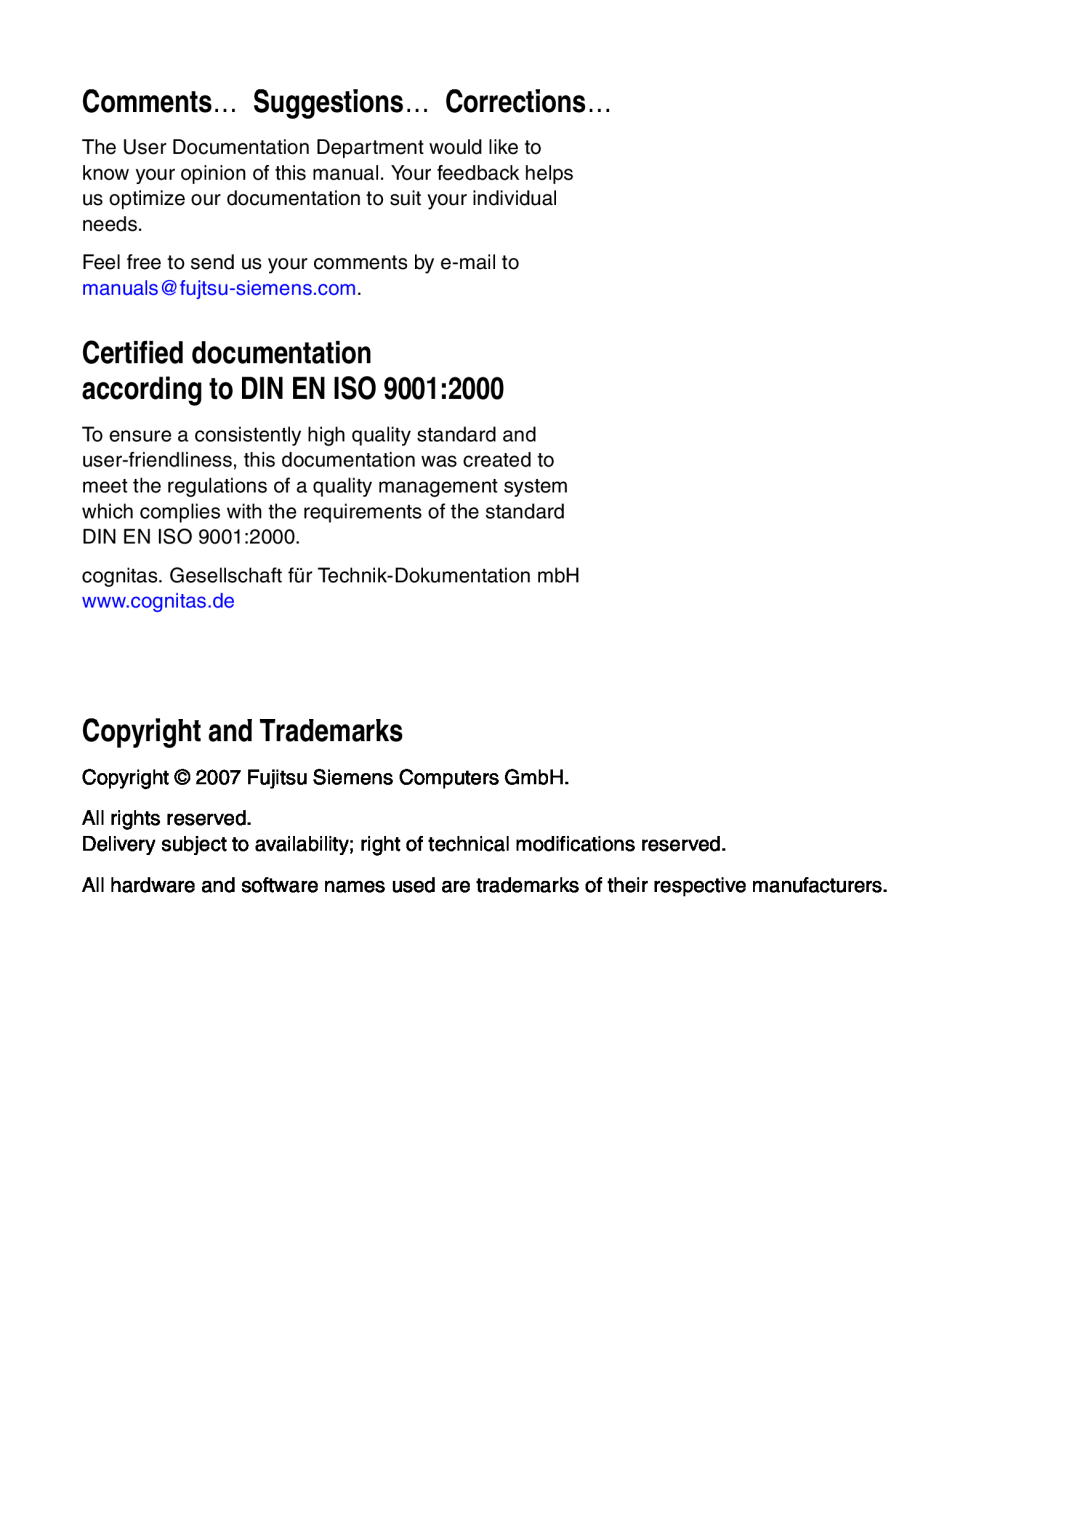 Fujitsu D2529 technical manual Comments… Suggestions… Corrections…, Copyright and Trademarks 